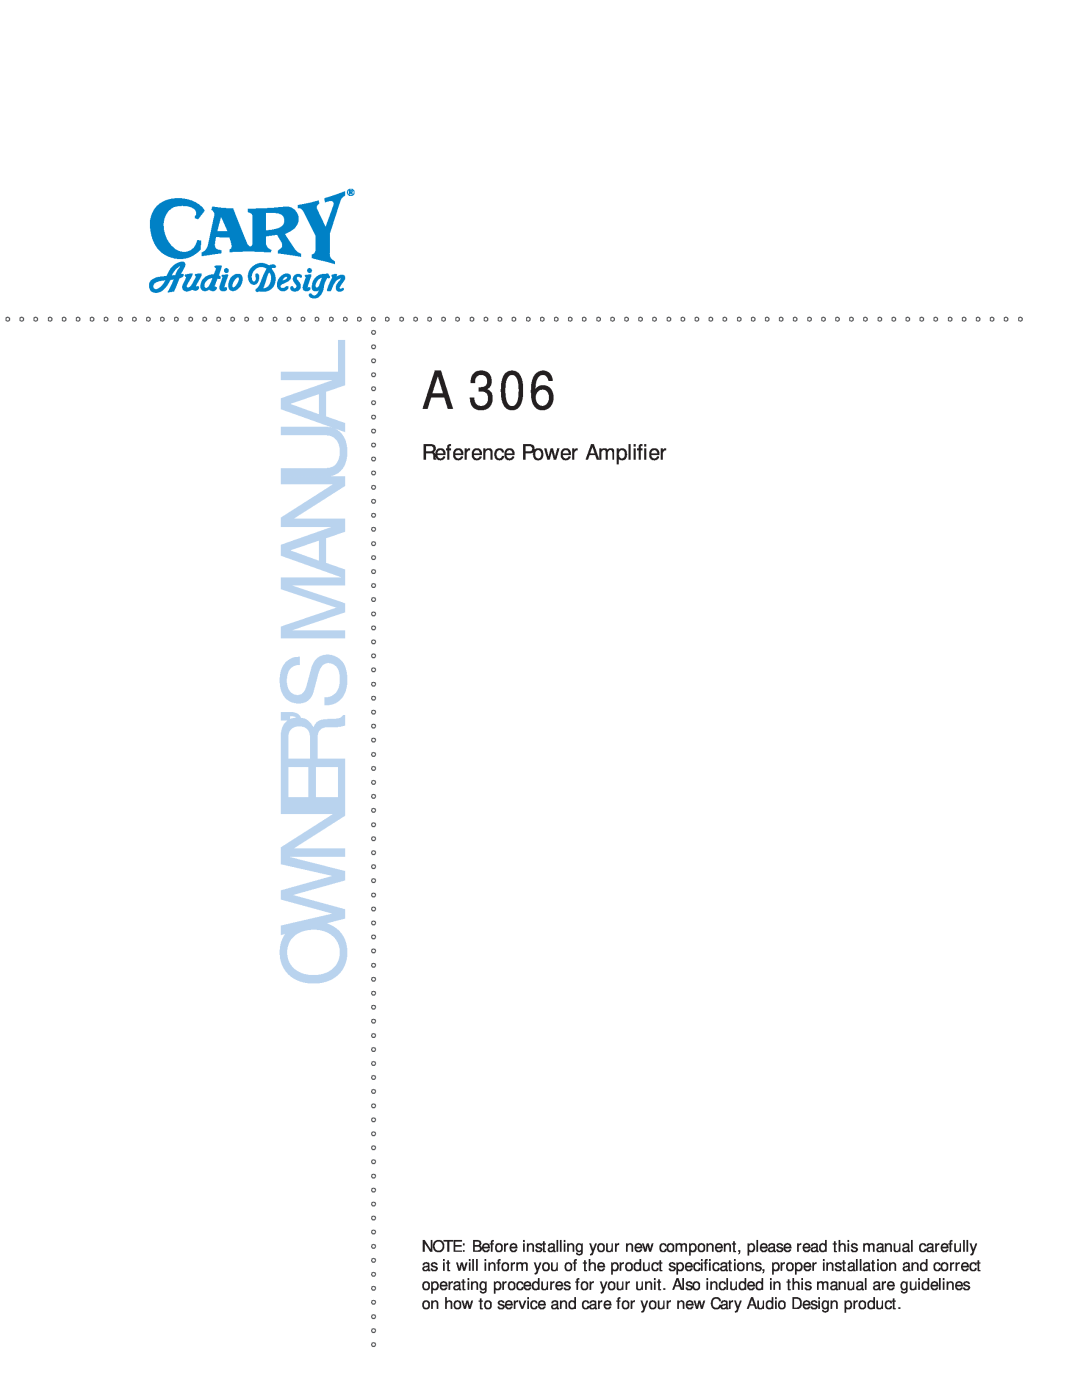 Cary Audio Design A 306 owner manual Reference Power Ampliﬁer 